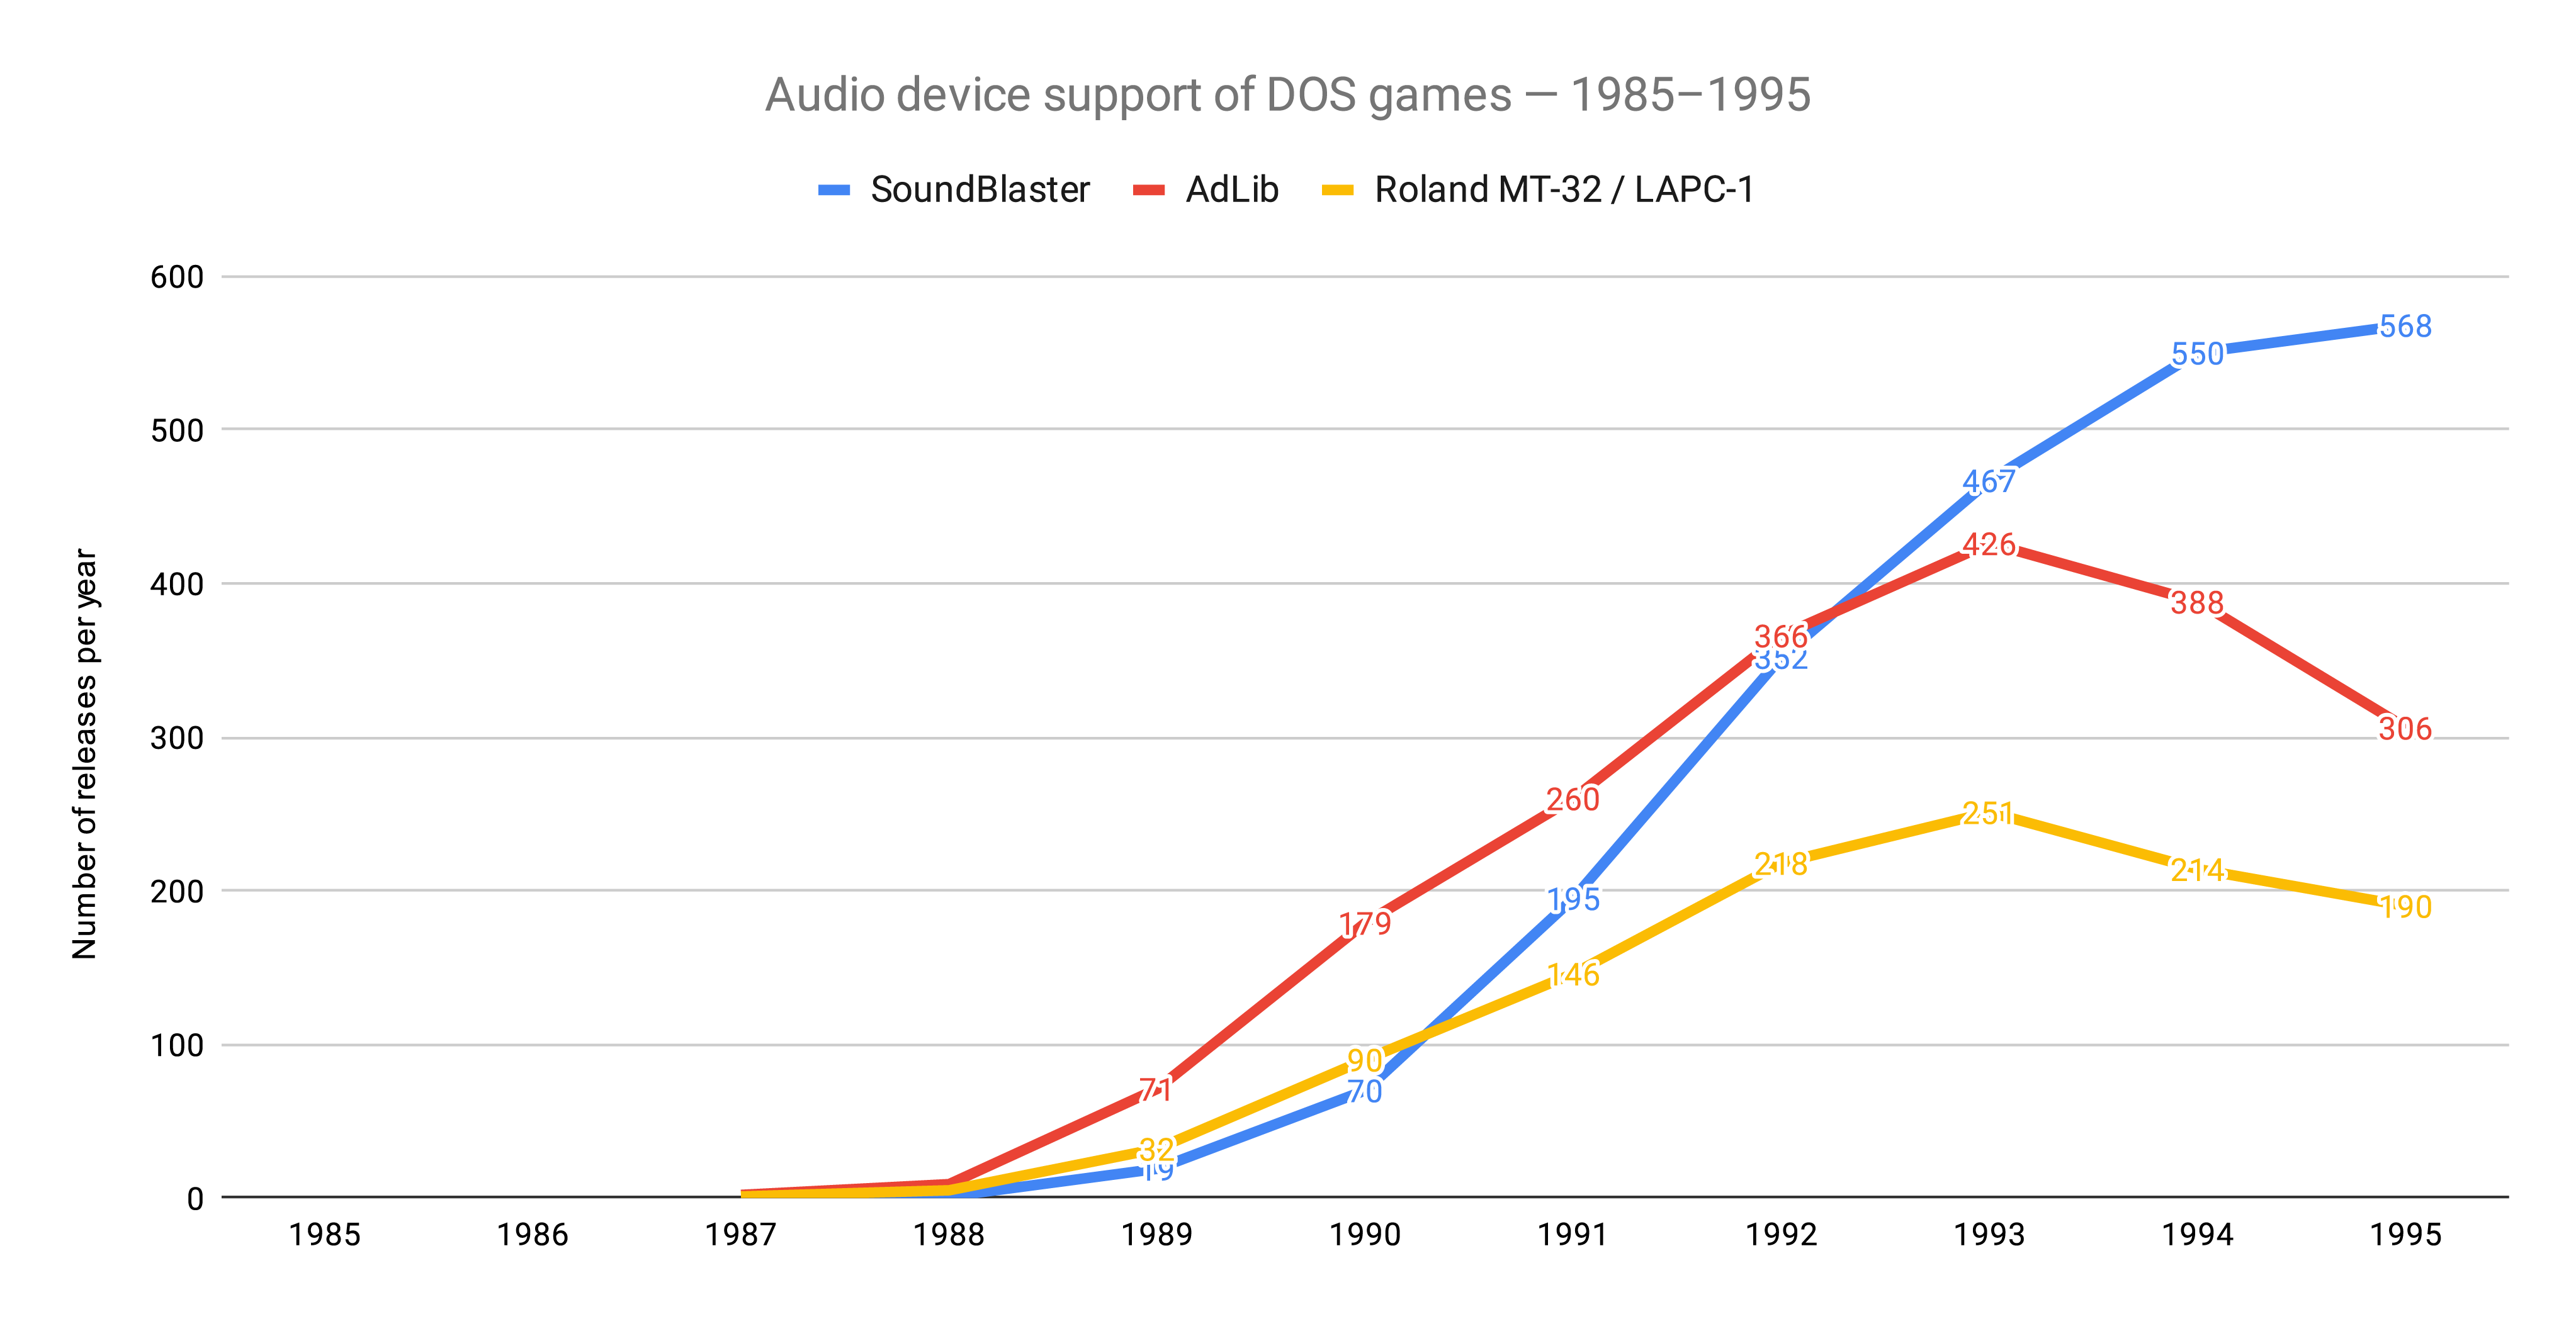 Audio device support of DOS games between 1985-1995